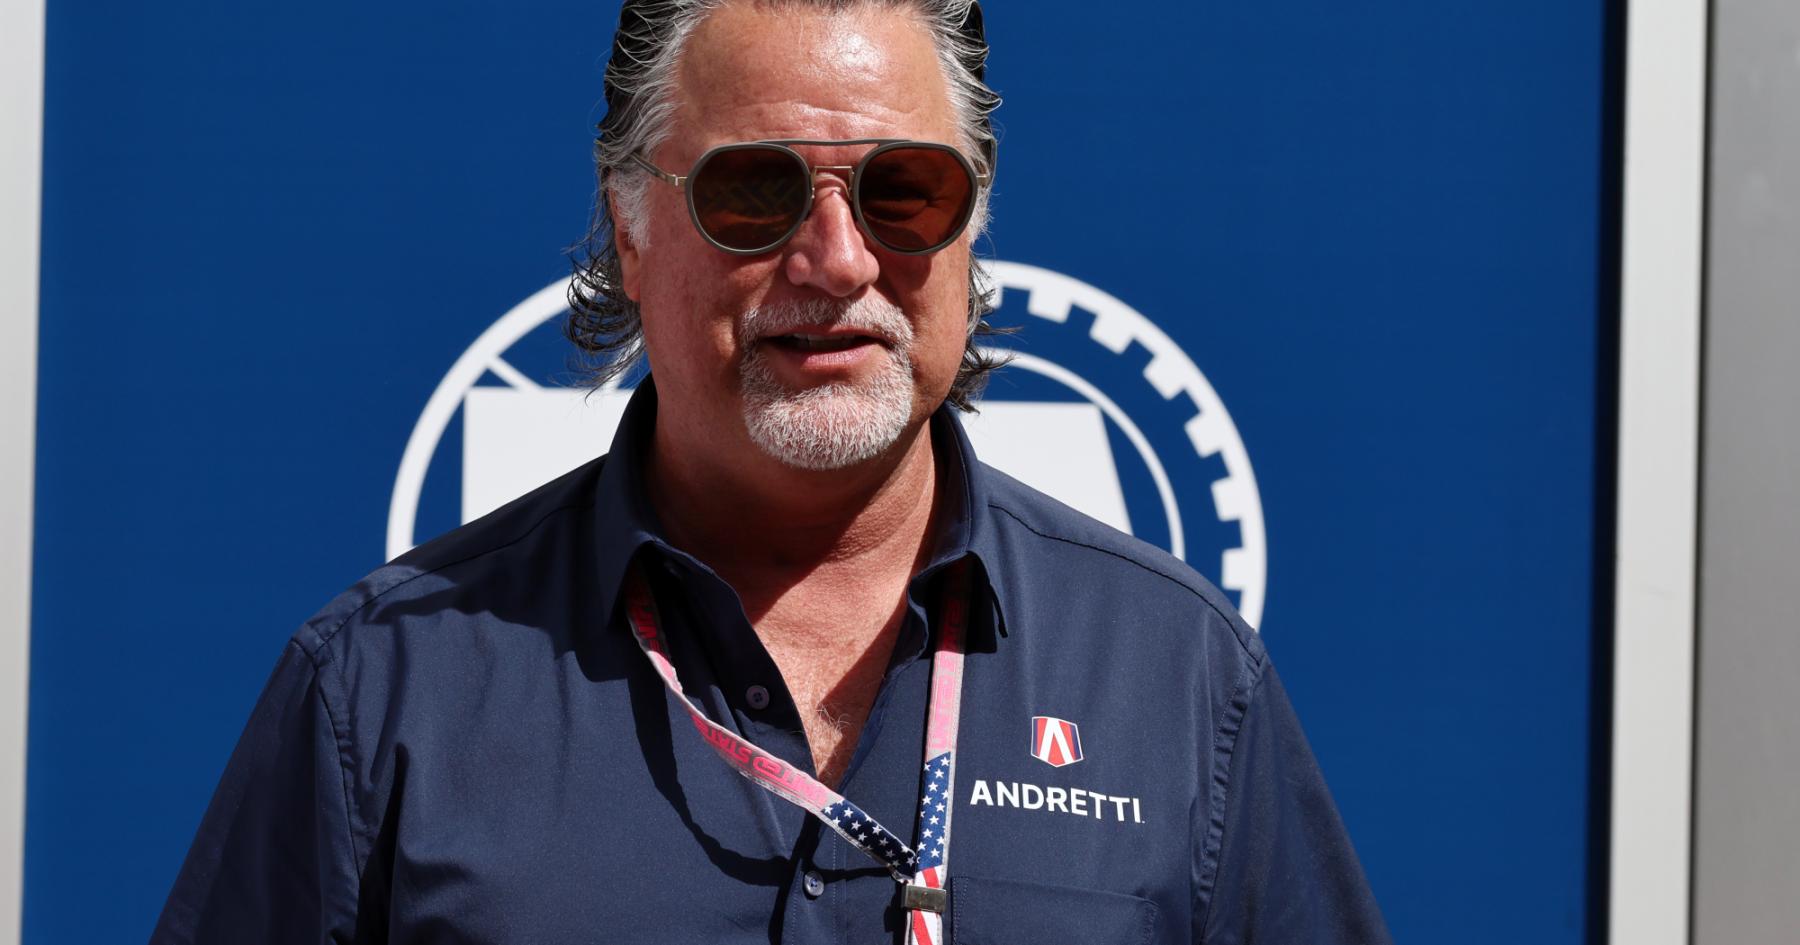 Andretti issues fresh statement after F1 entry bid rejection